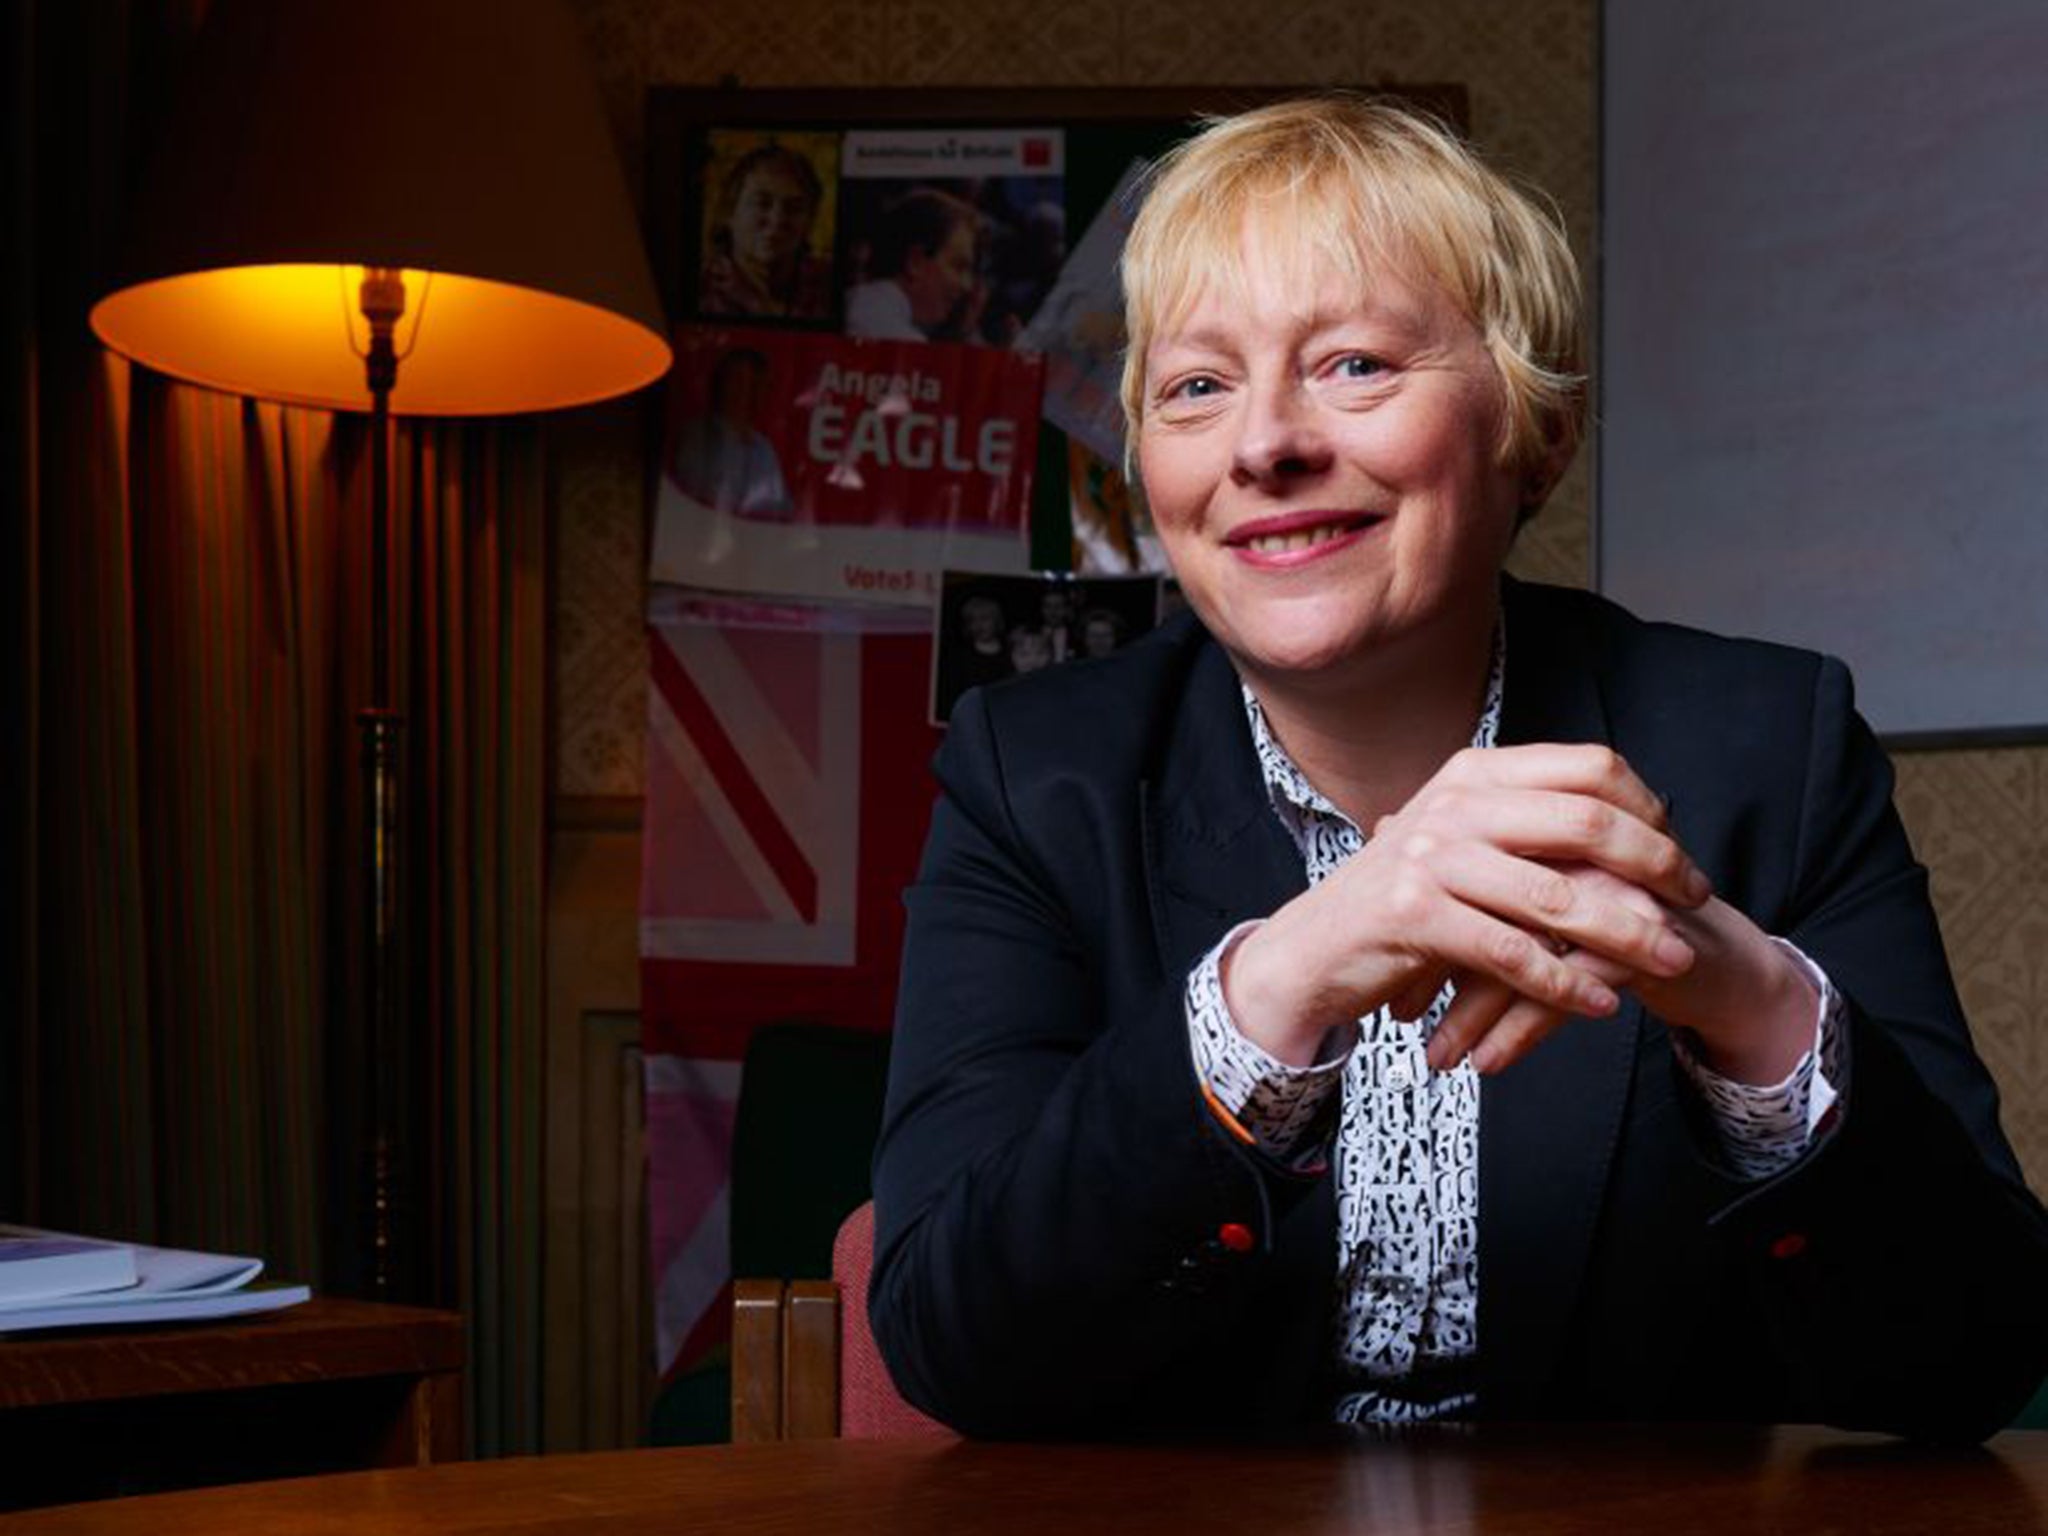 Angela Eagle says she has some radical ideas on how to reform the Commons, if Labour is elected